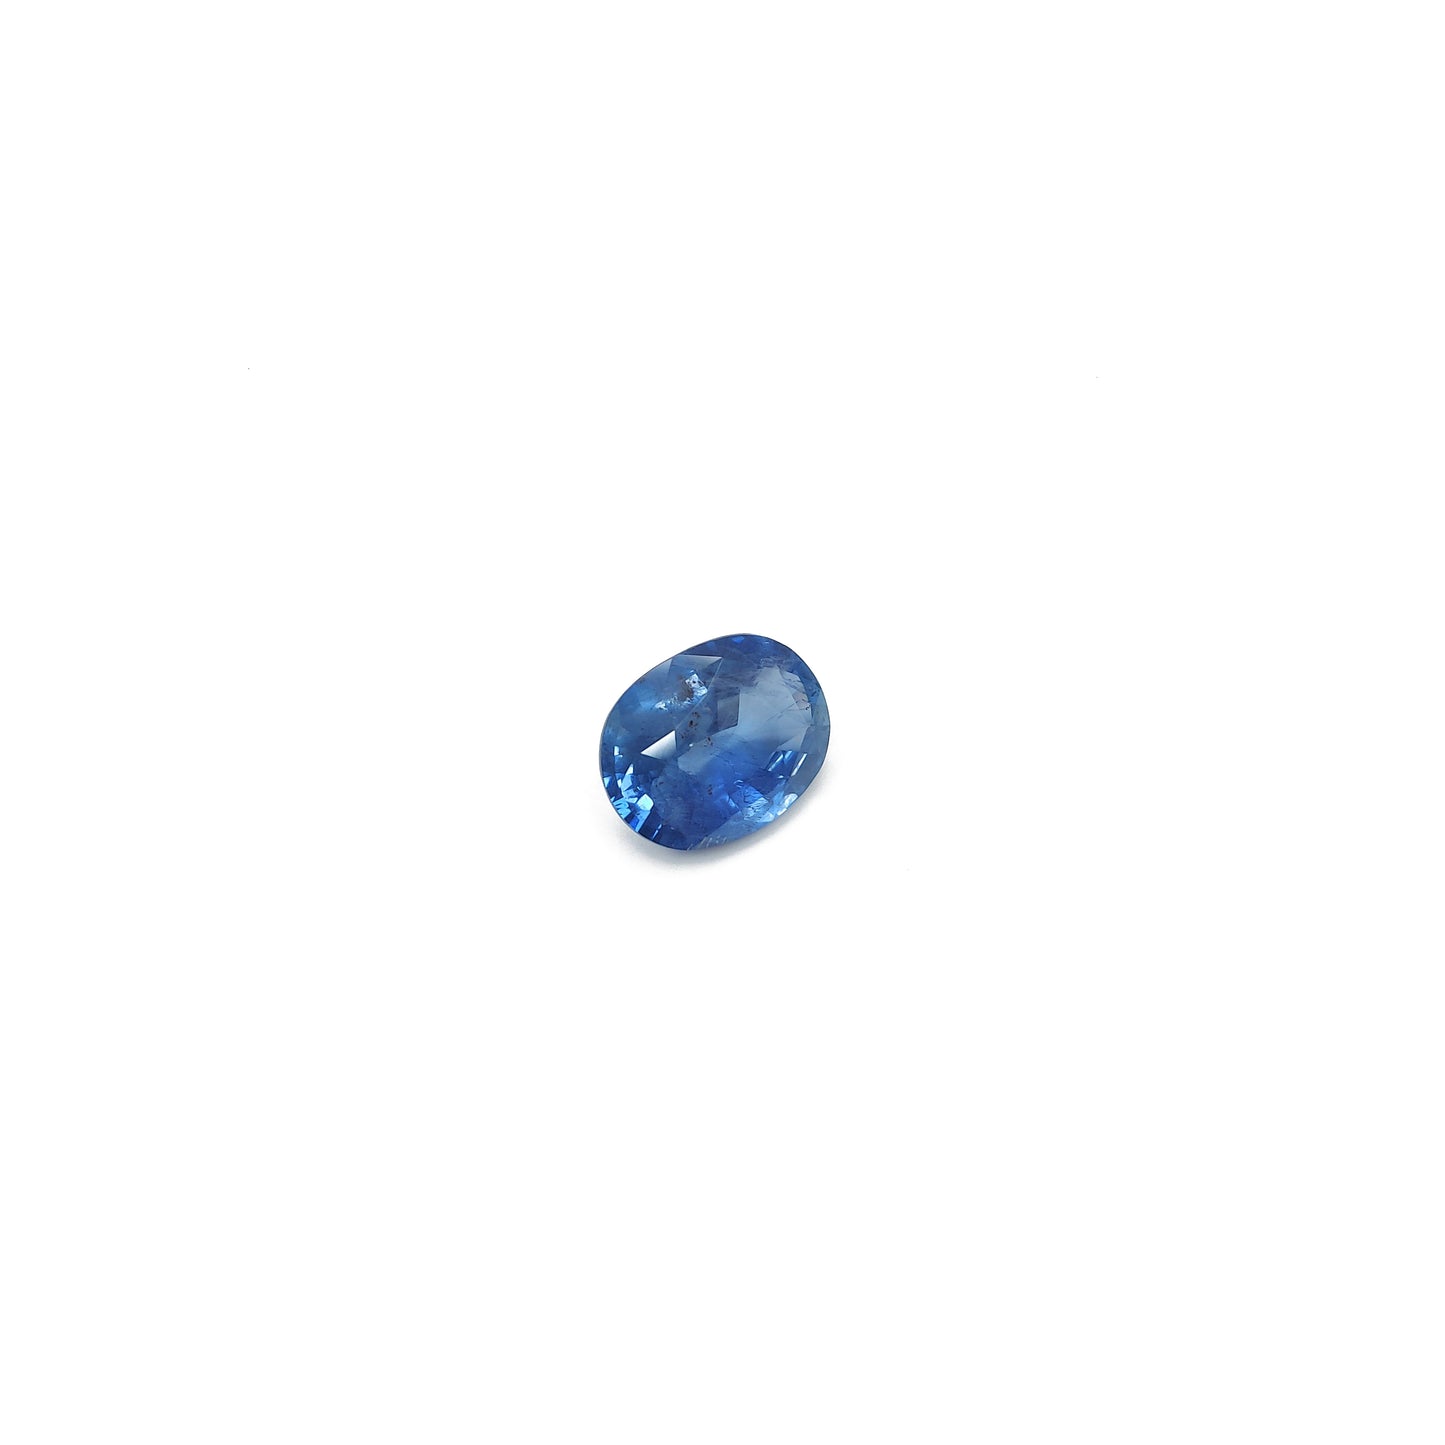 100% Natural Unheated Blue Sapphire | 8.16cts